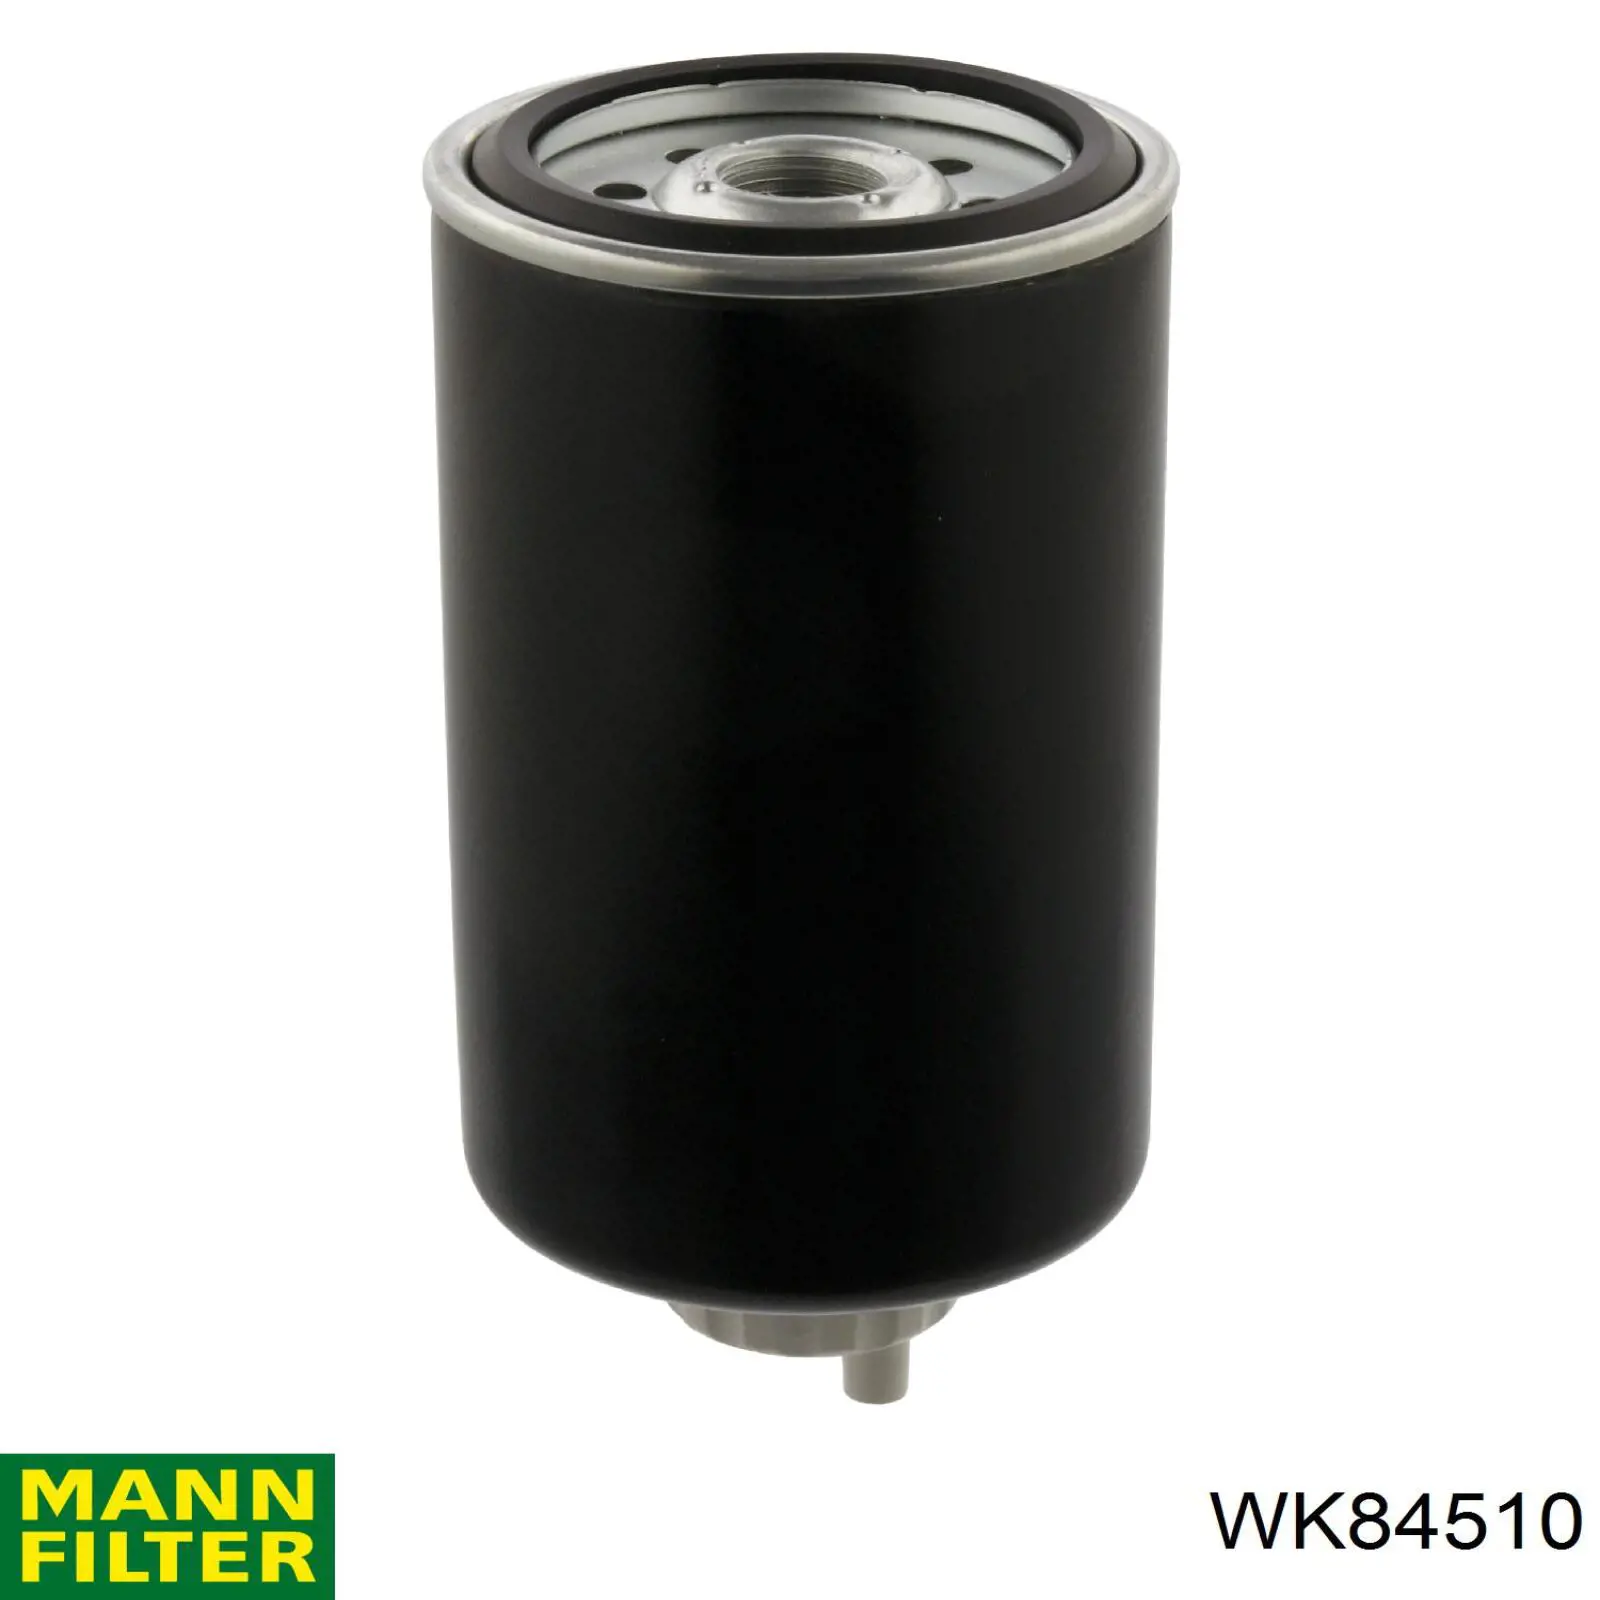 WK84510 Mann-Filter filtro combustible